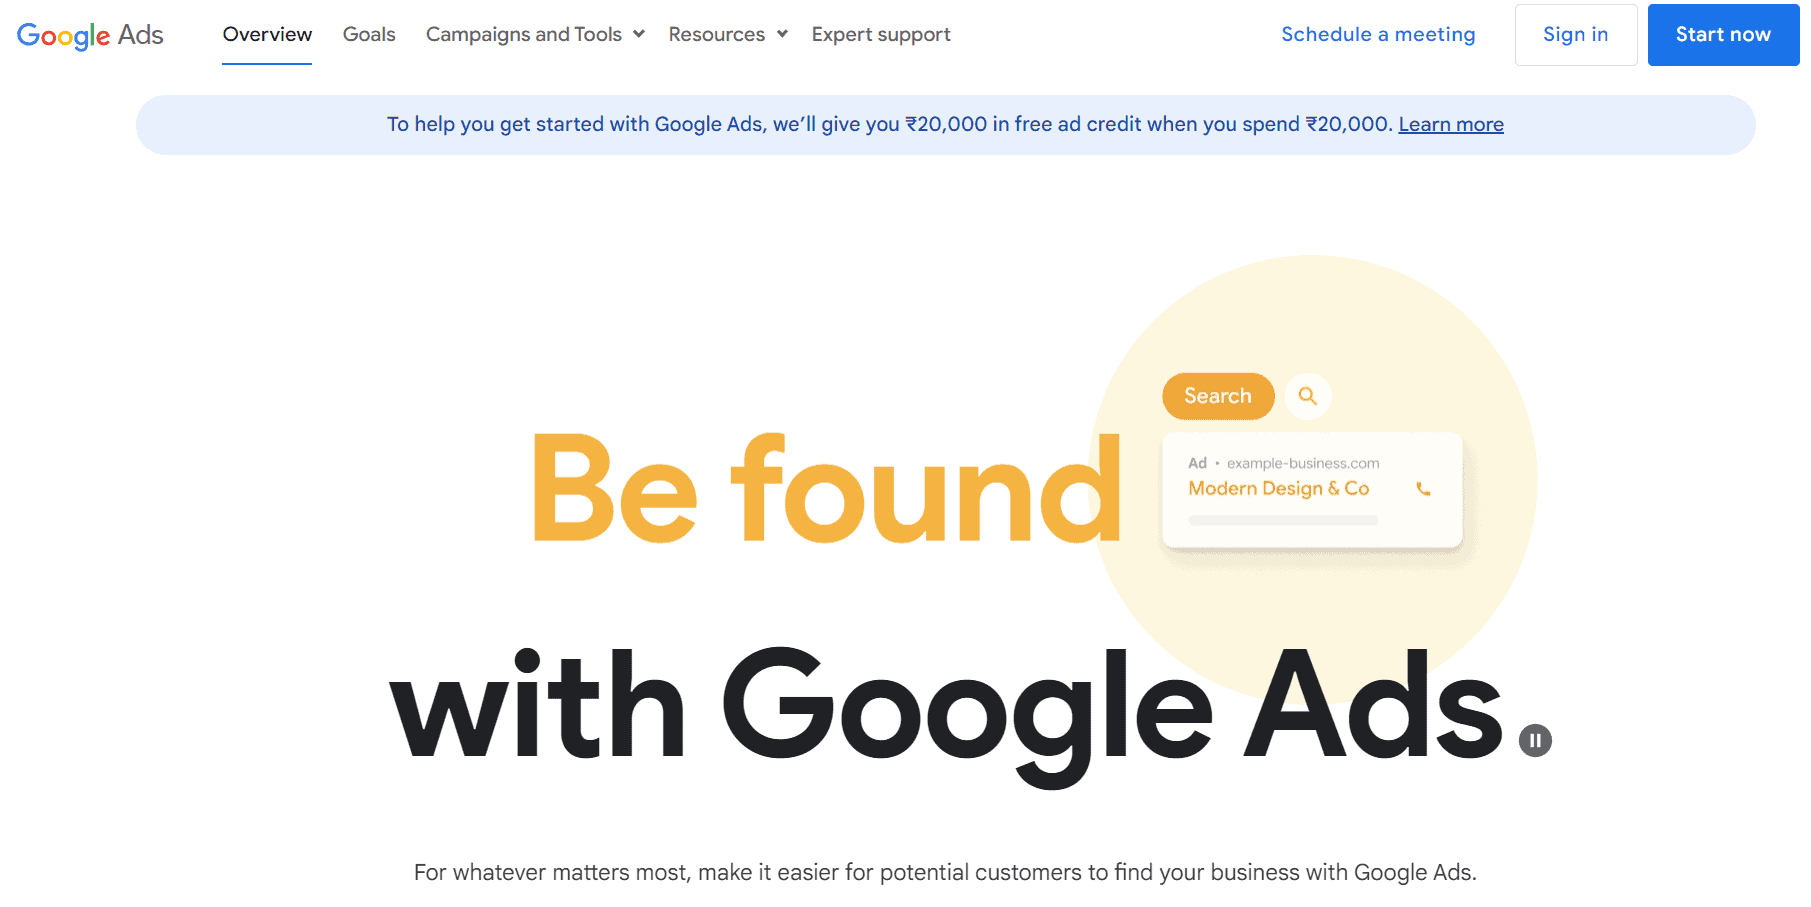 Image showing page for Creating an account in Google Ads